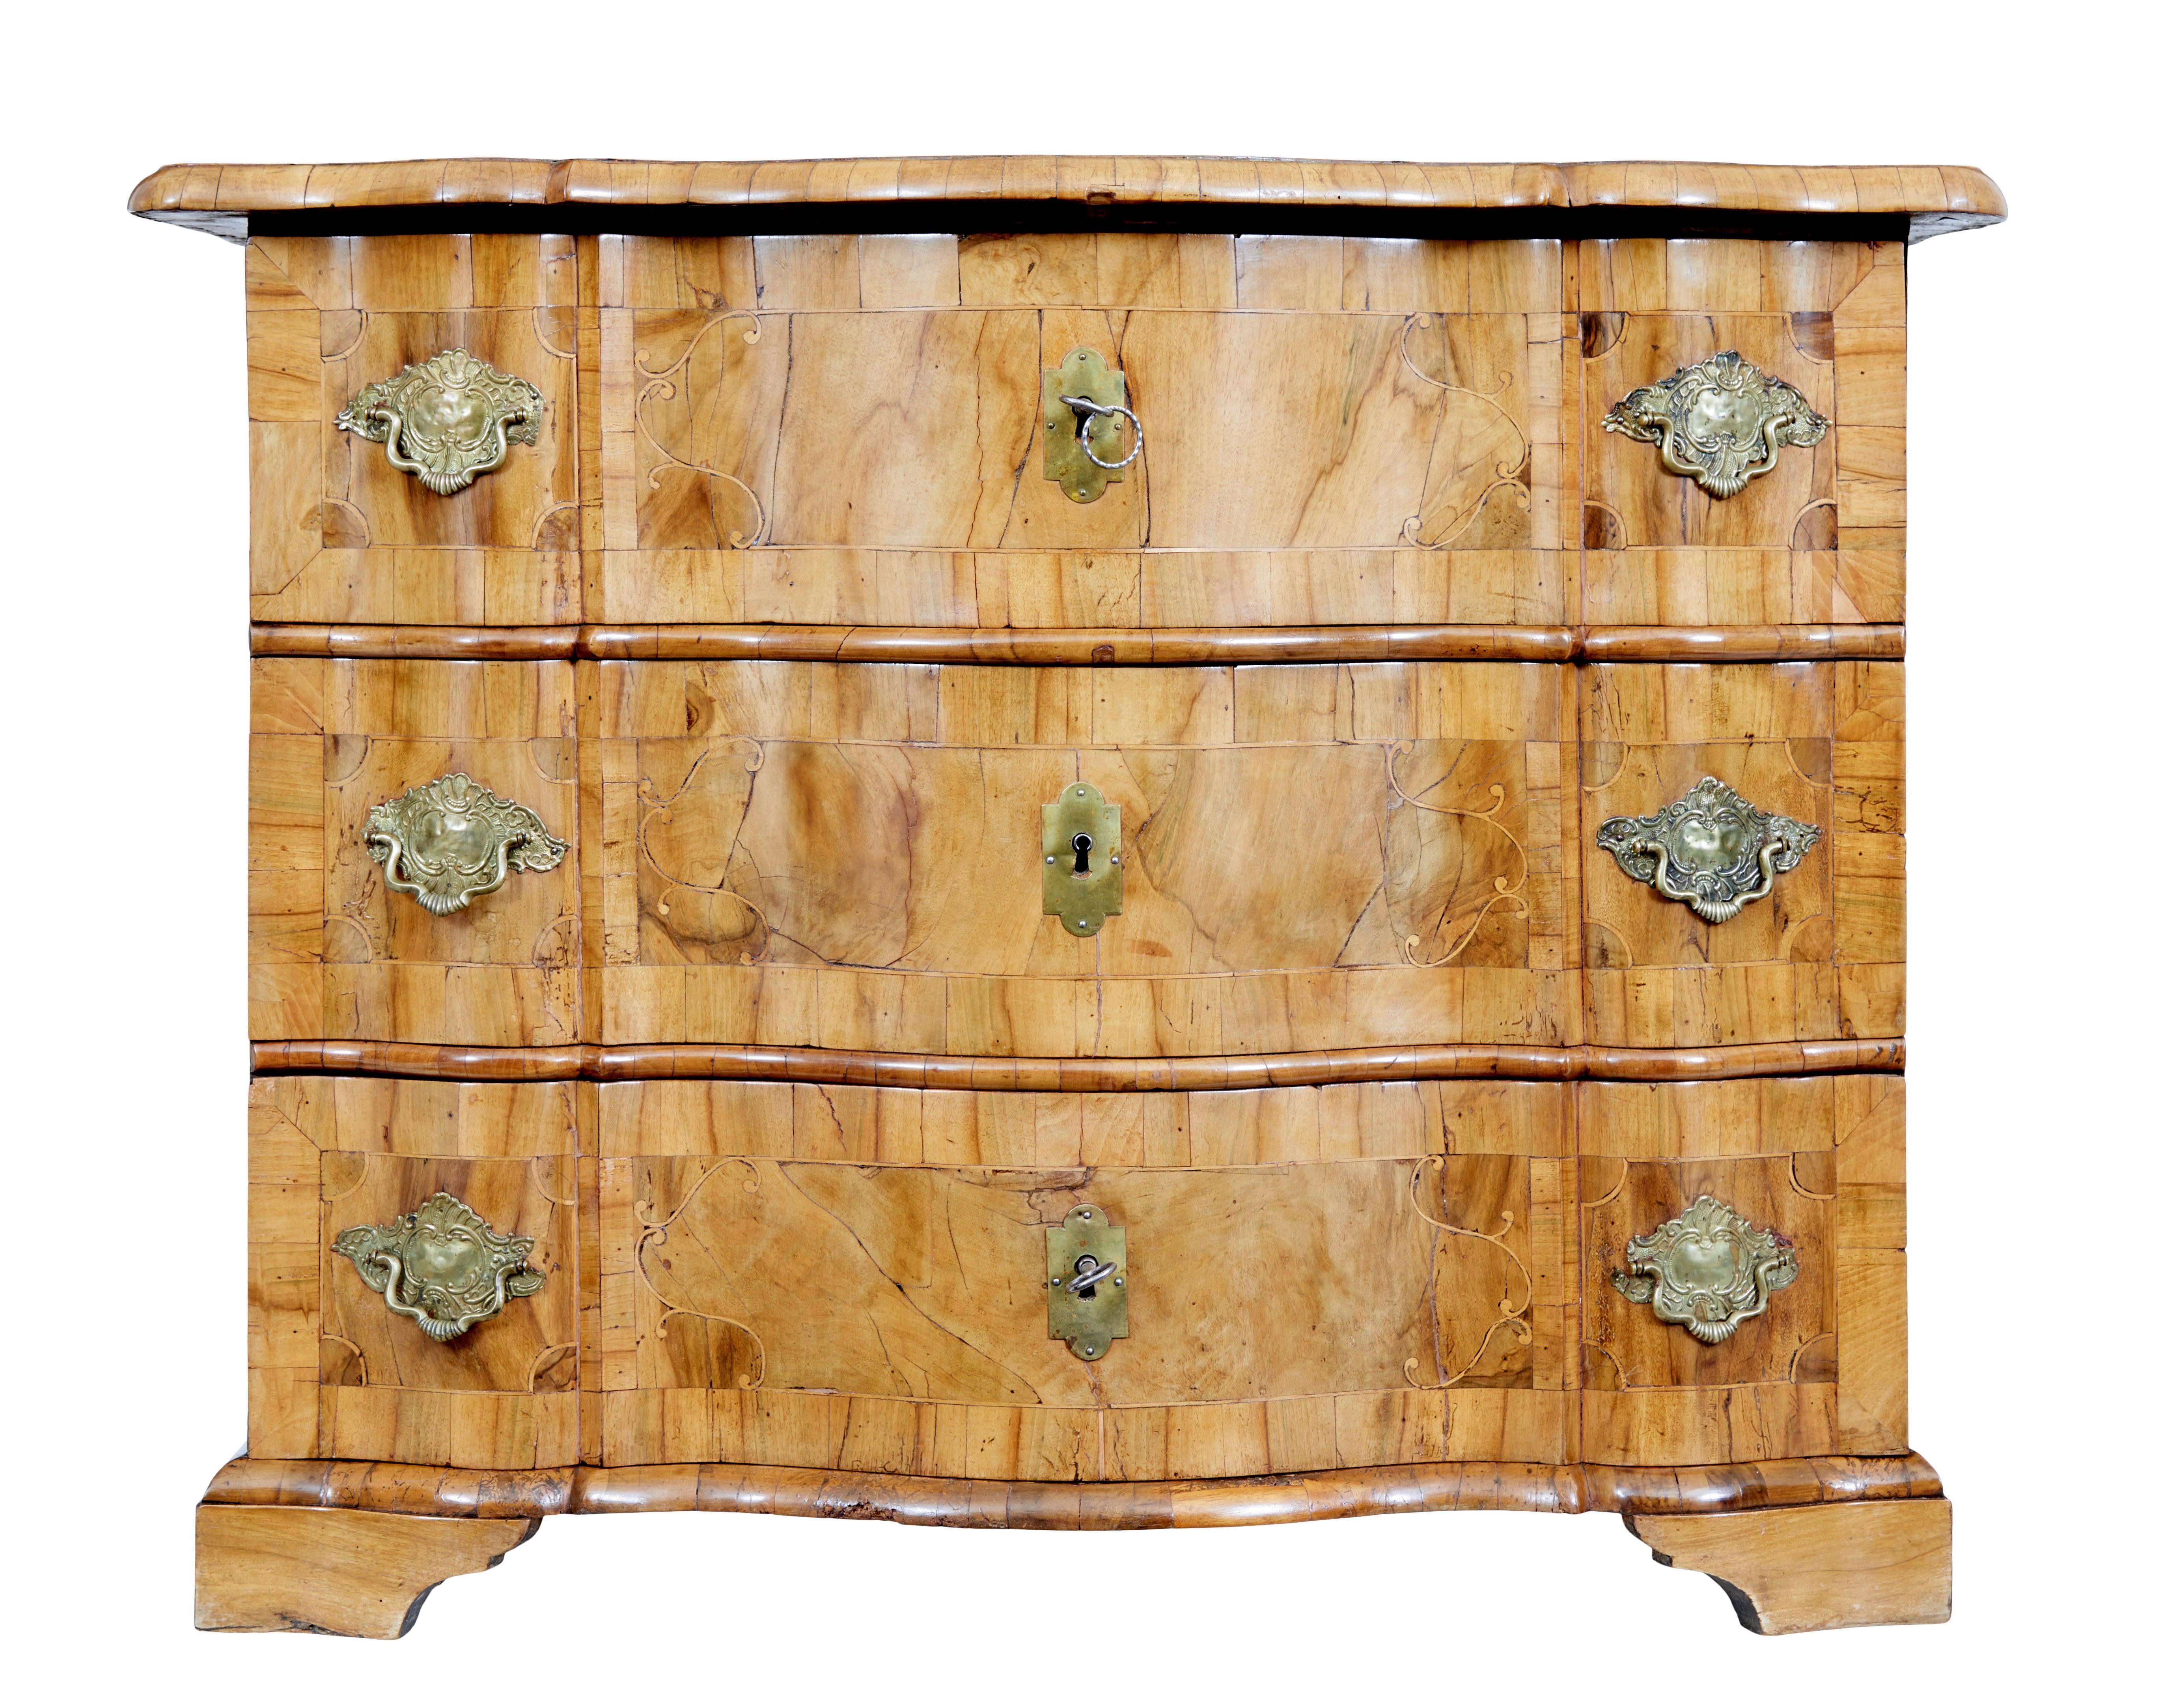 Fine quality 18th century burr walnut chest of drawers circa 1730.

Fine quality Swedish commode circa 1730.

Beautiful natural colour which has taken nearly 300 years to develop.  Serpentine over sailing top.  3 shaped drawer fronts with inlay